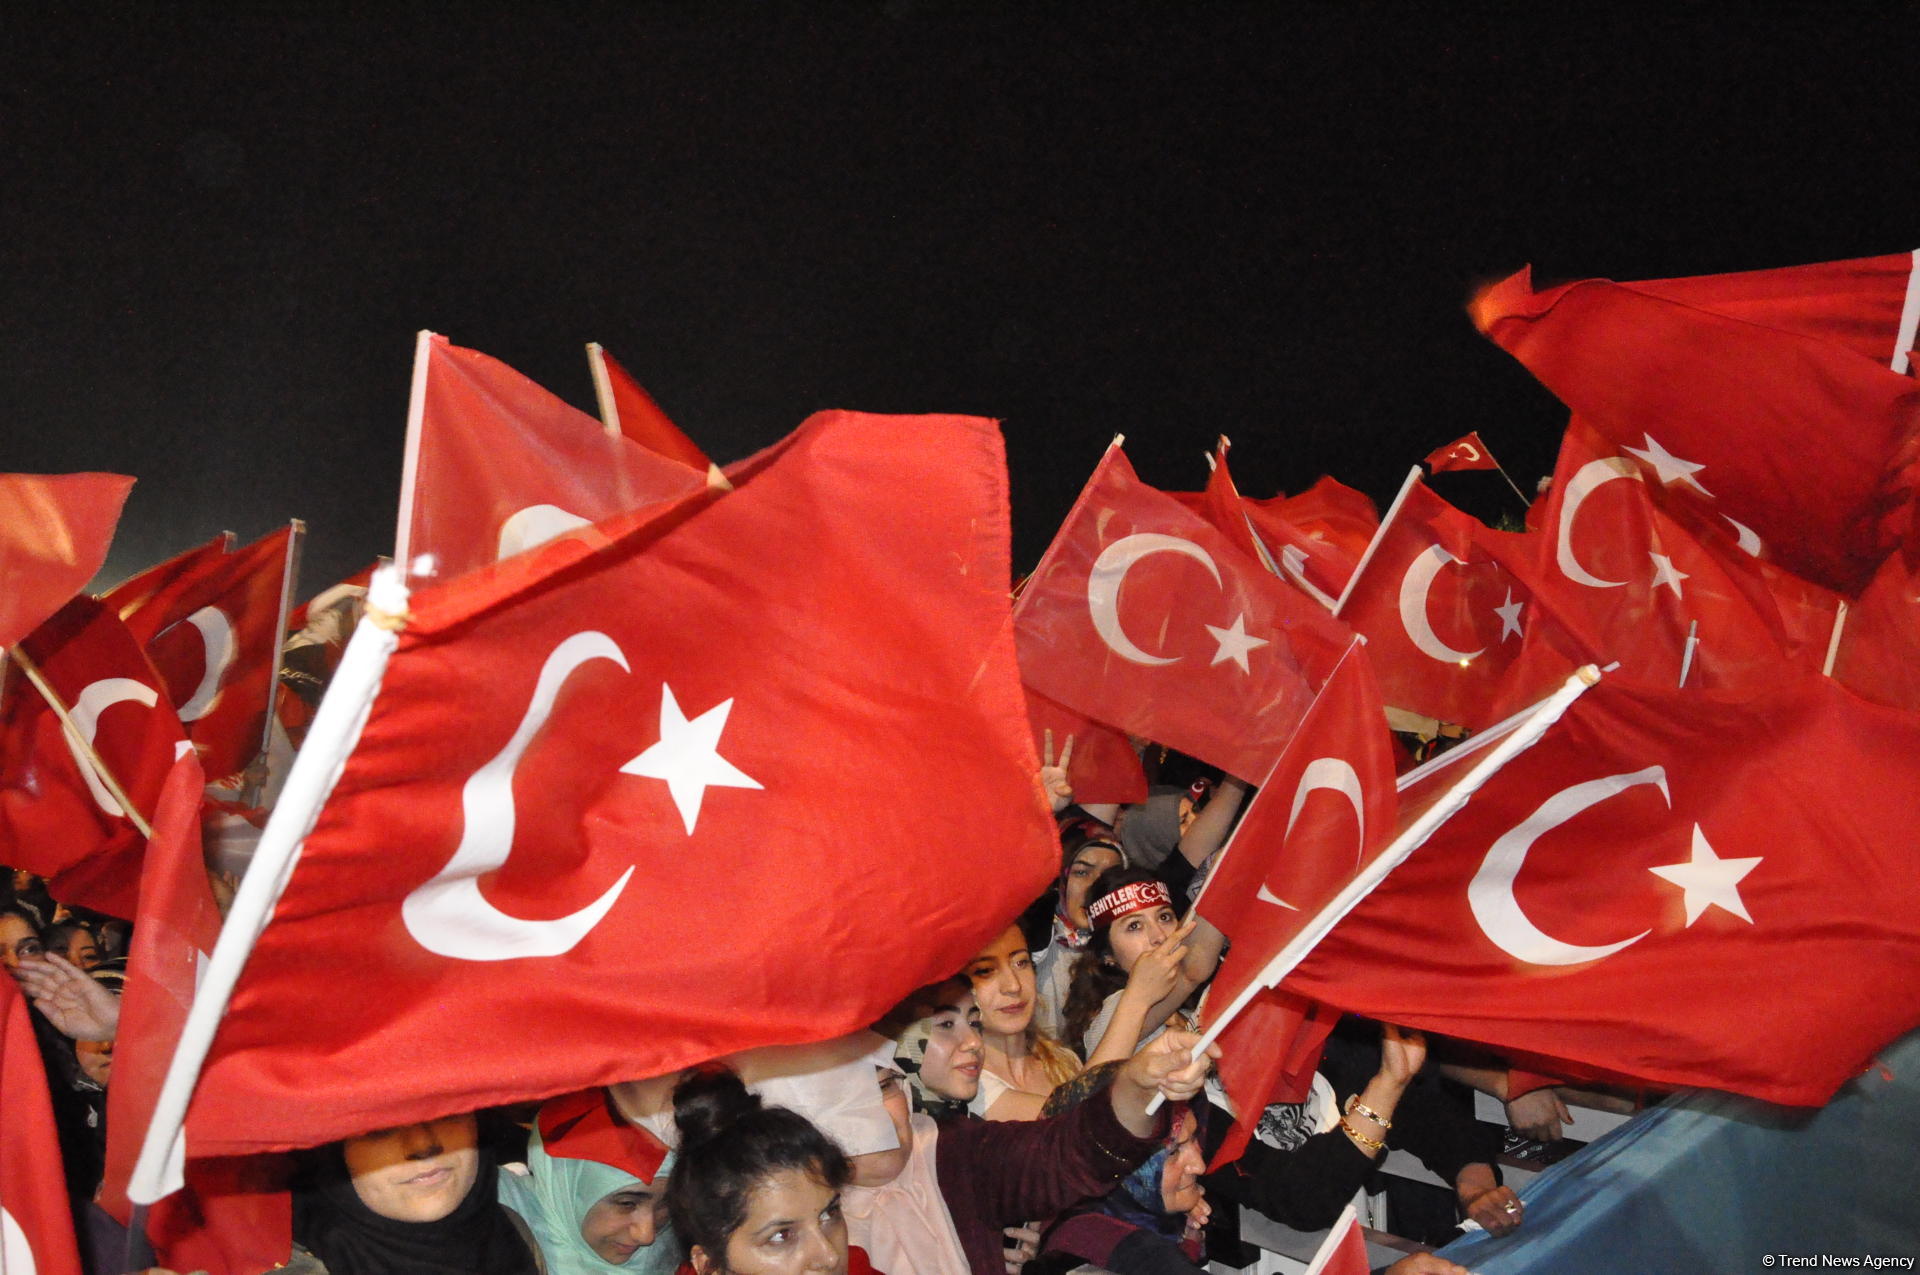 Protest rallies against recognition of Jerusalem as Israel’s capital start in Turkey